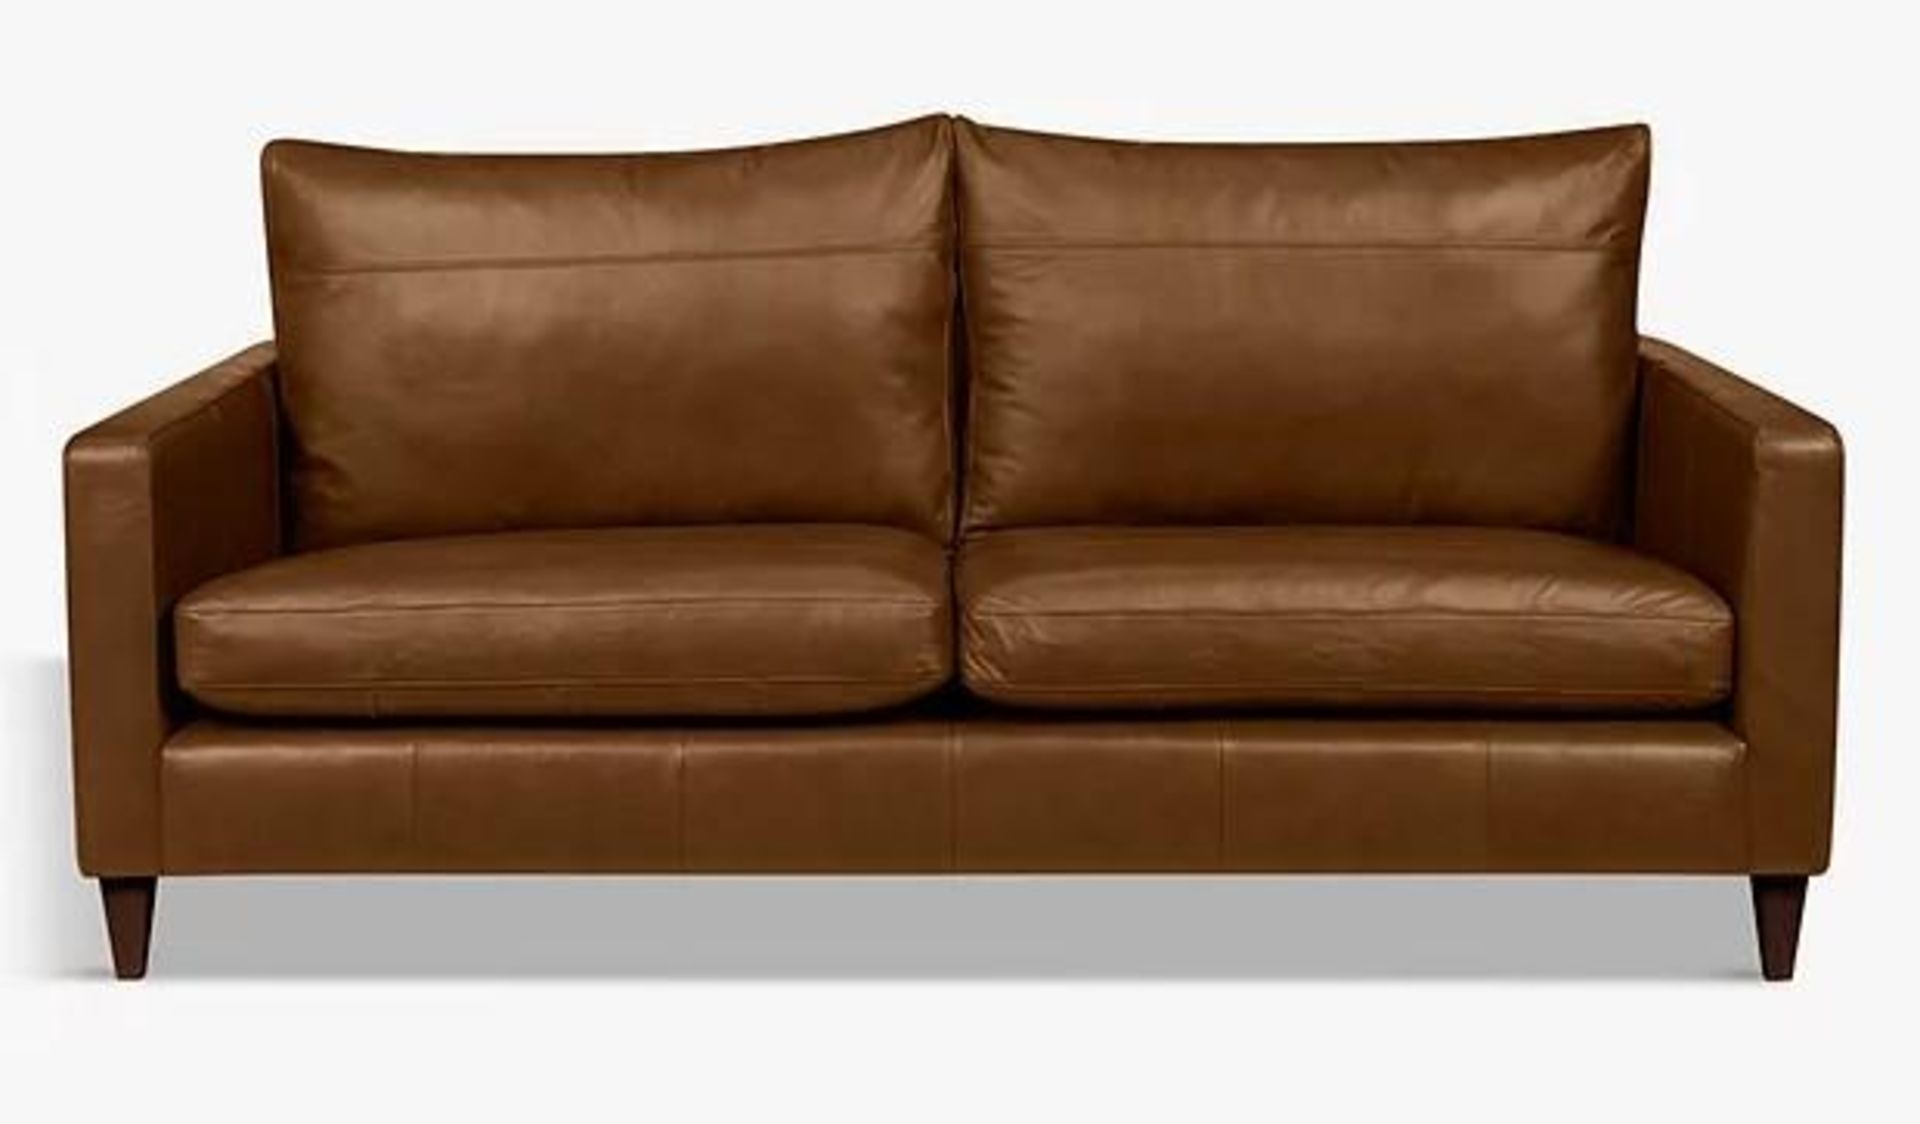 BRAND NEW John Lewis Bailey full leather 3 seater sofa in Tan. RRP: £1,699.00 - Image 2 of 4